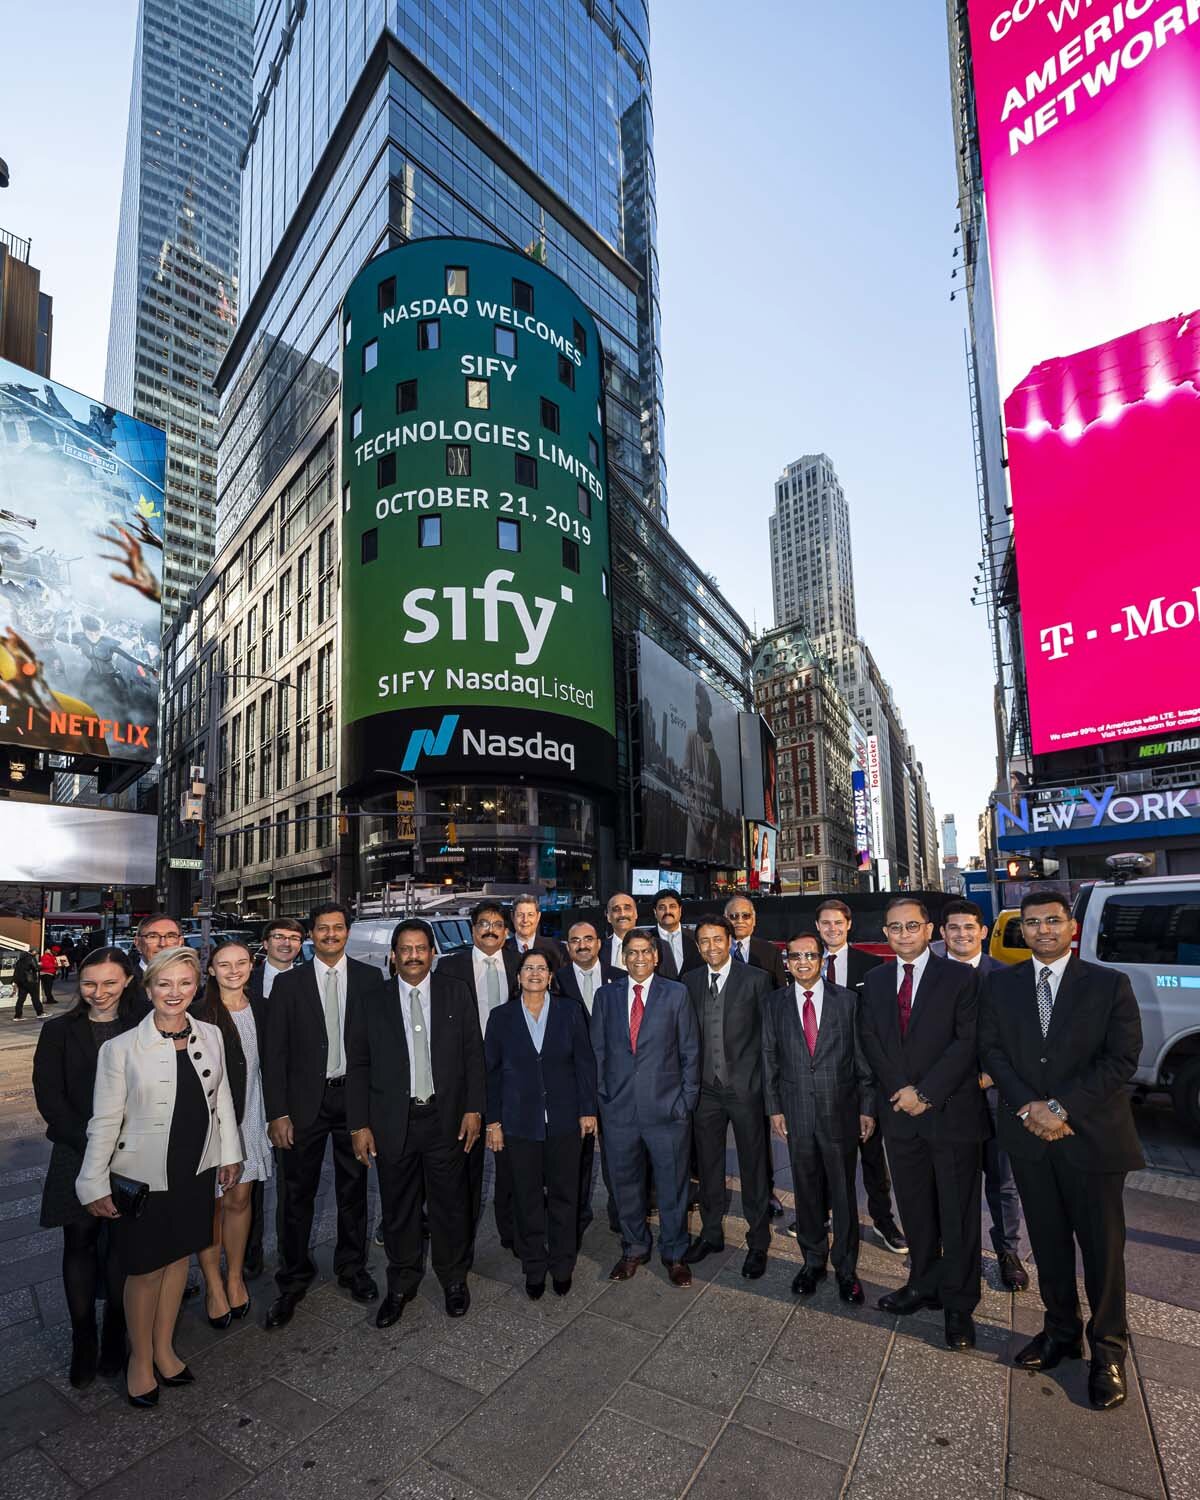  Group photo and Nasdaq Opening bell photographer in New York City 